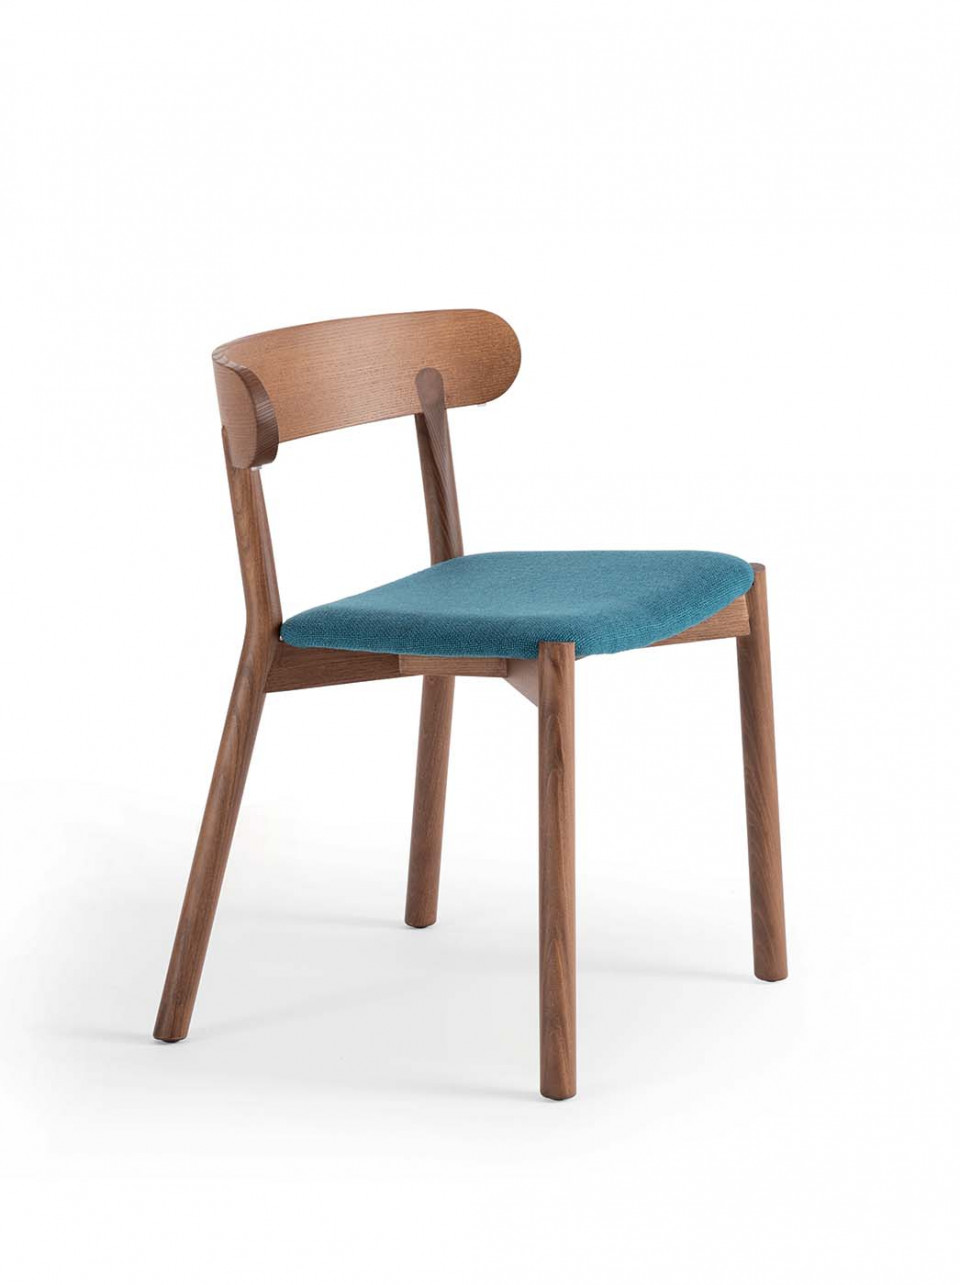 Montera wooden chair with blue seat